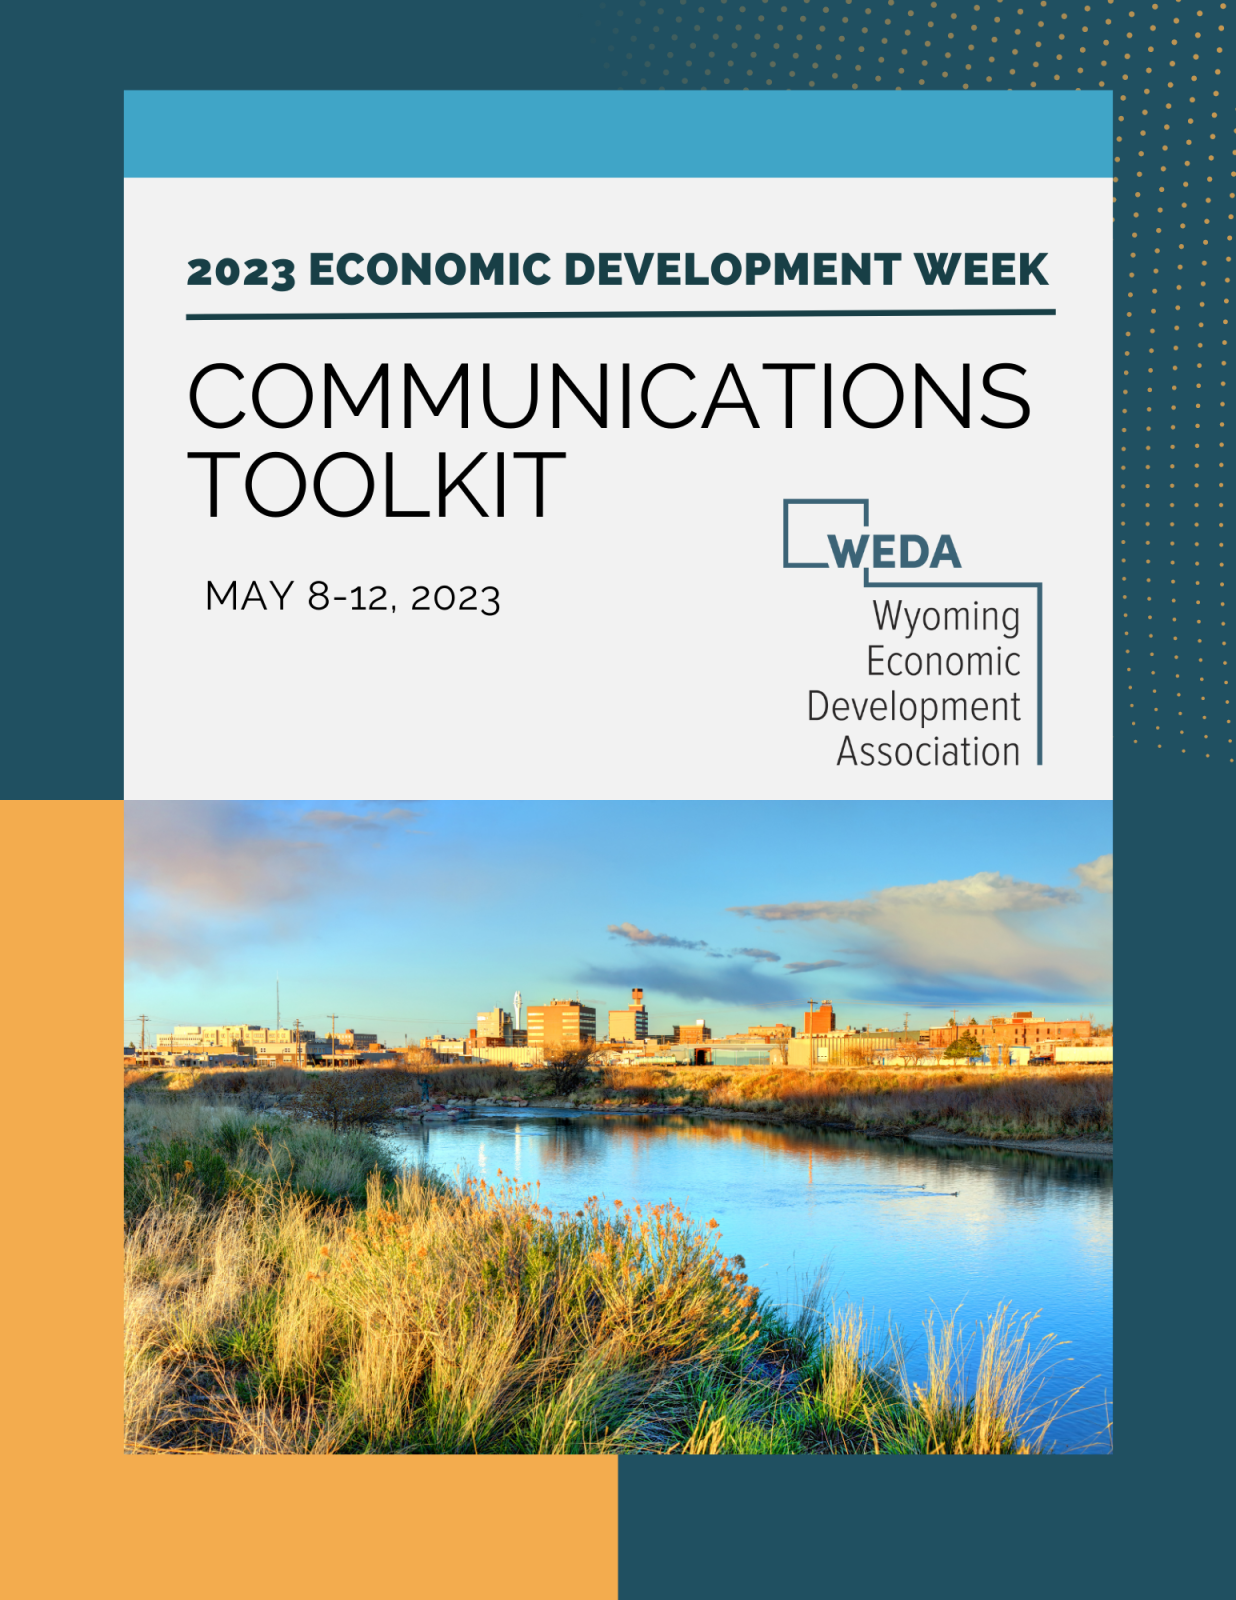 Click the Plan for 2023 Economic Development Week slide photo to open